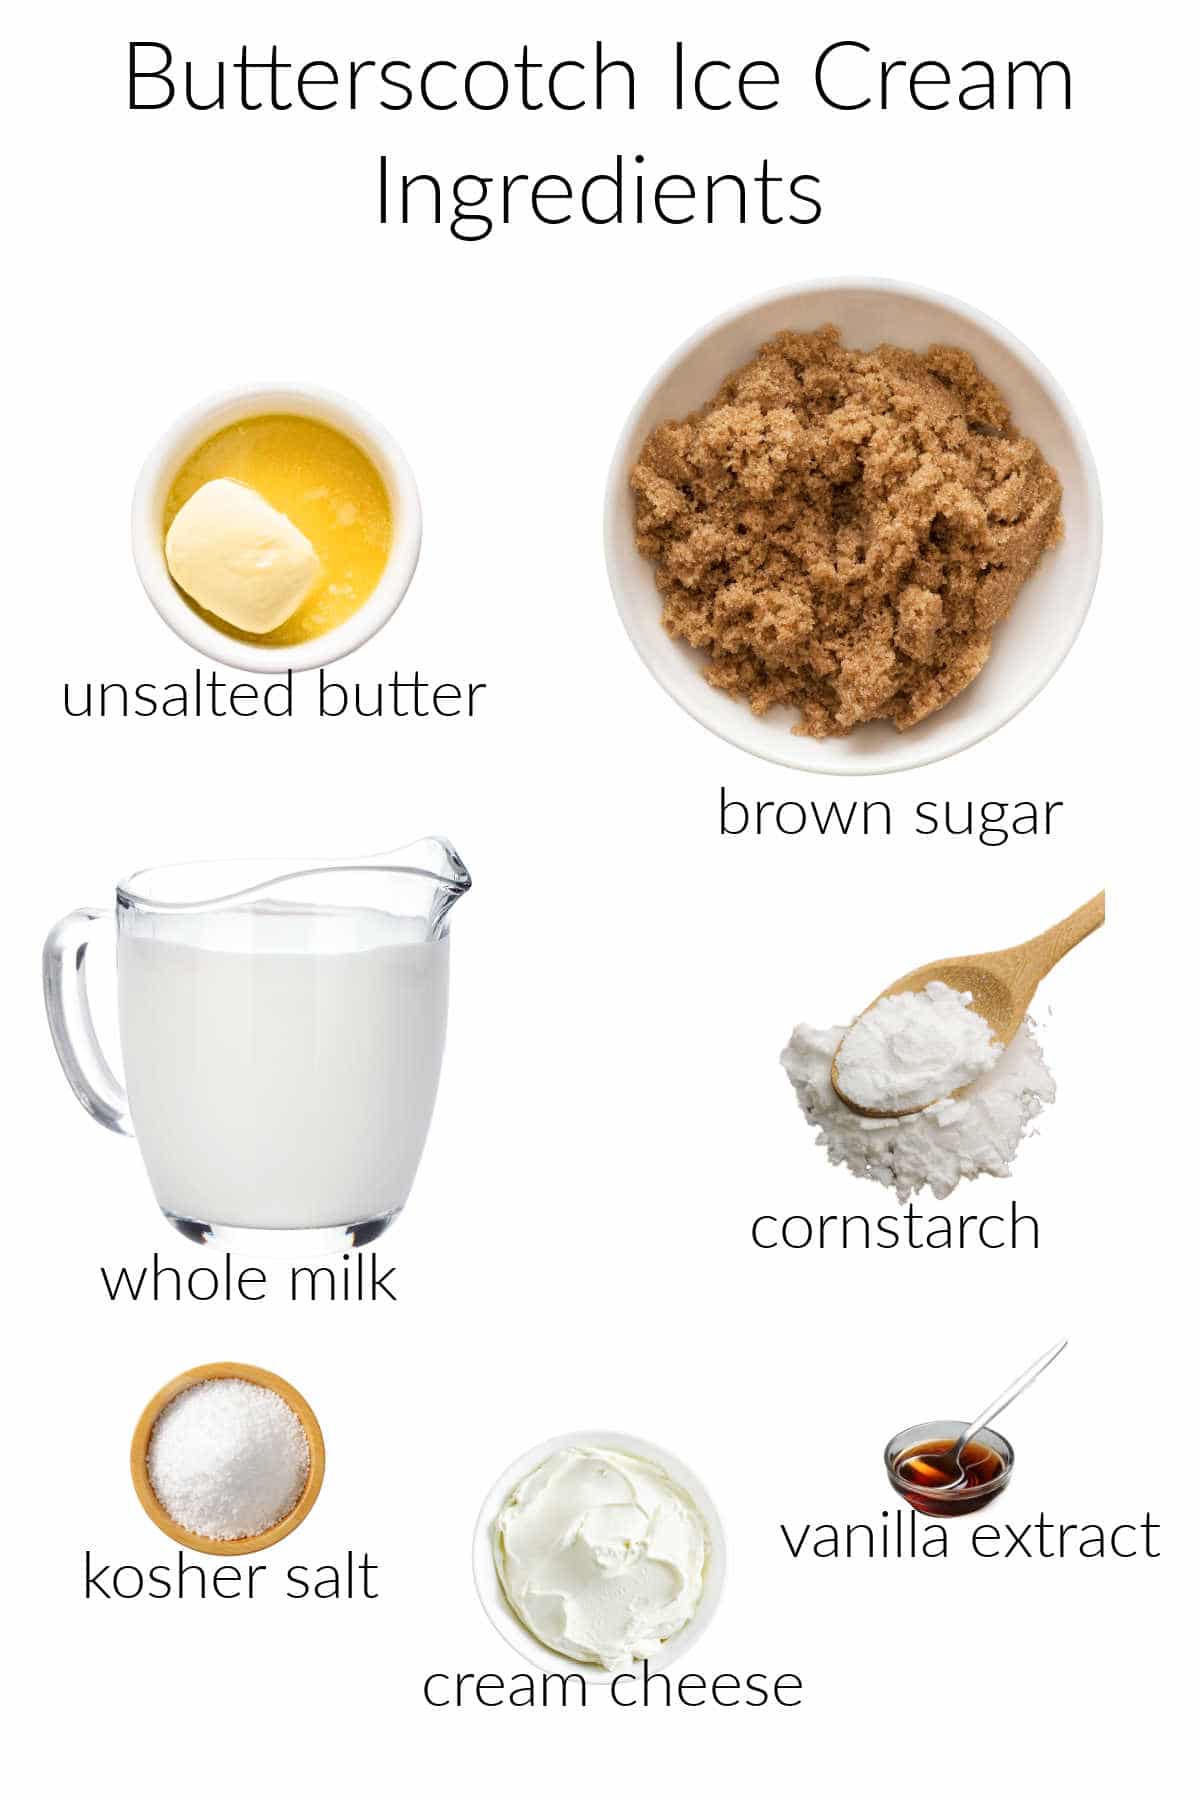 Collage of ingredients for making butterscotch ice cream.